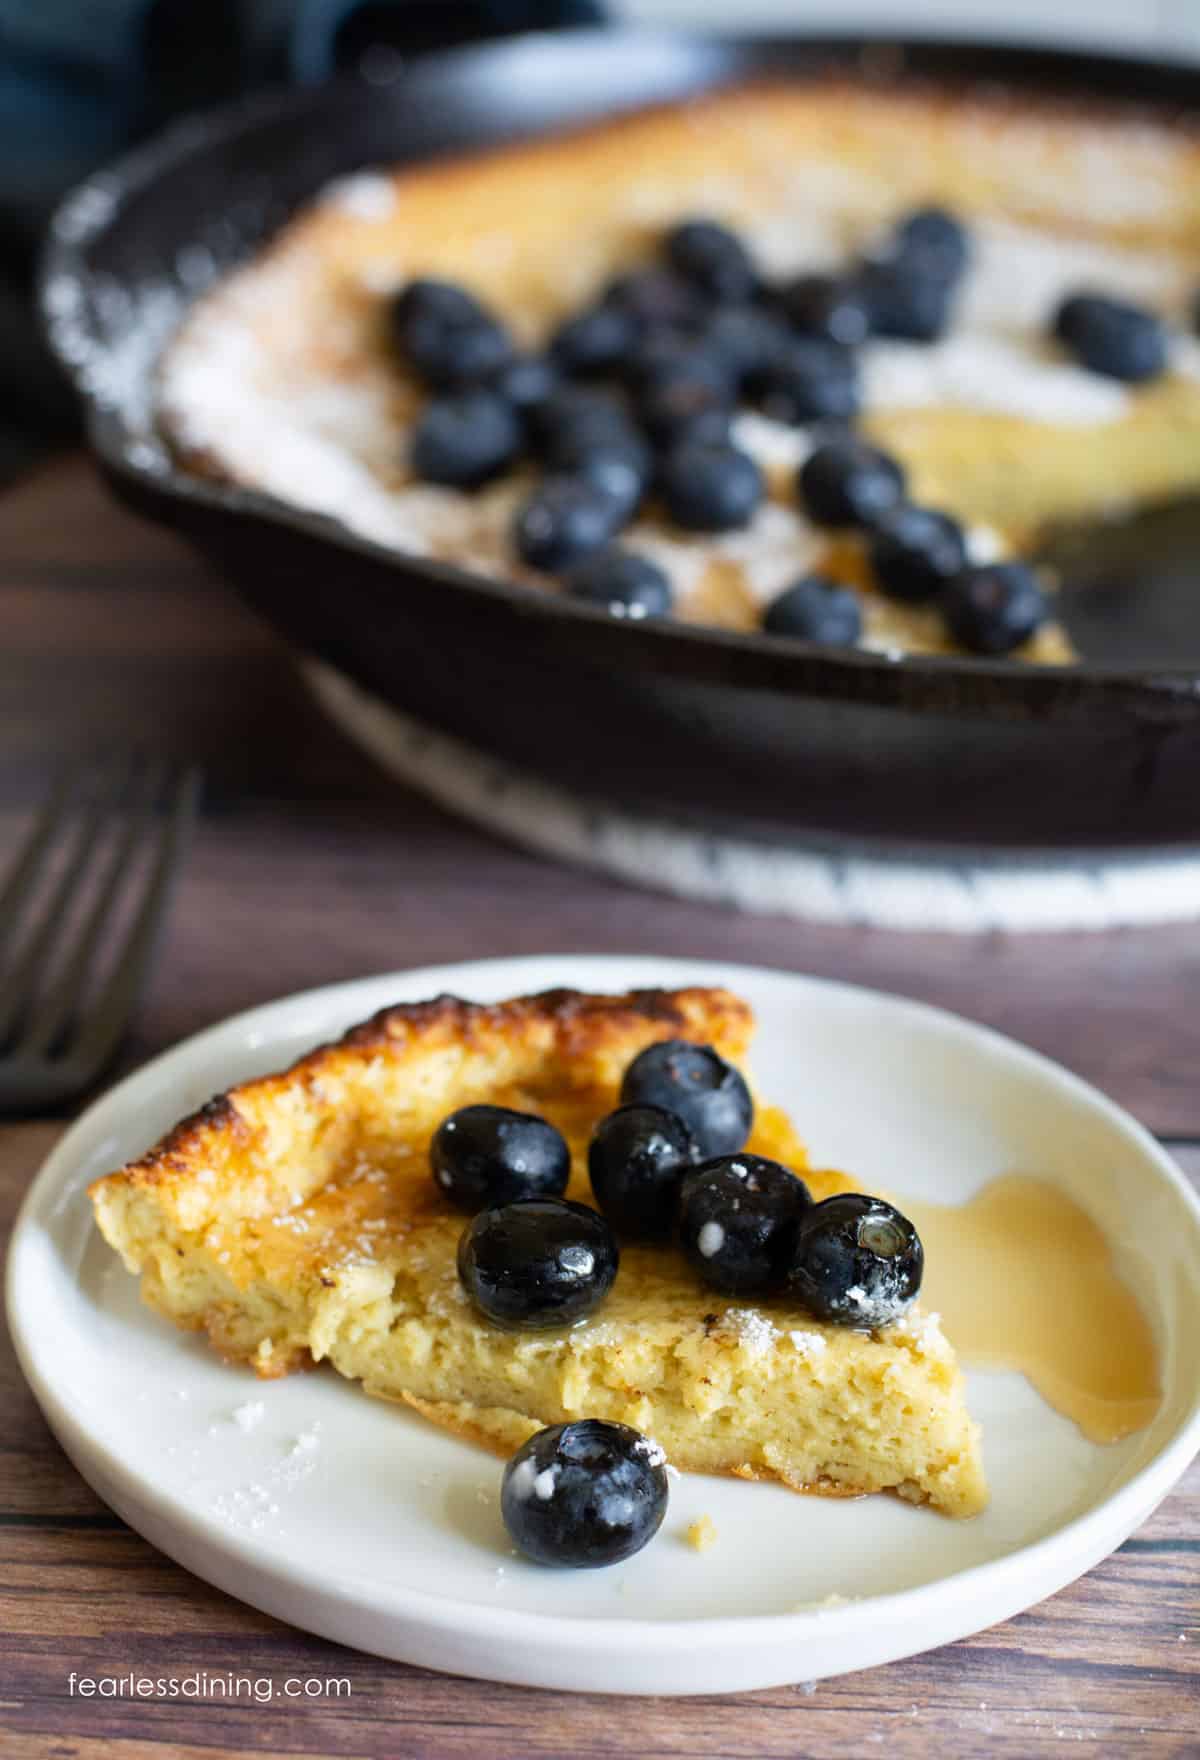 A slice of puff pancake on a plate. It is topped with blueberries and maple syrup.